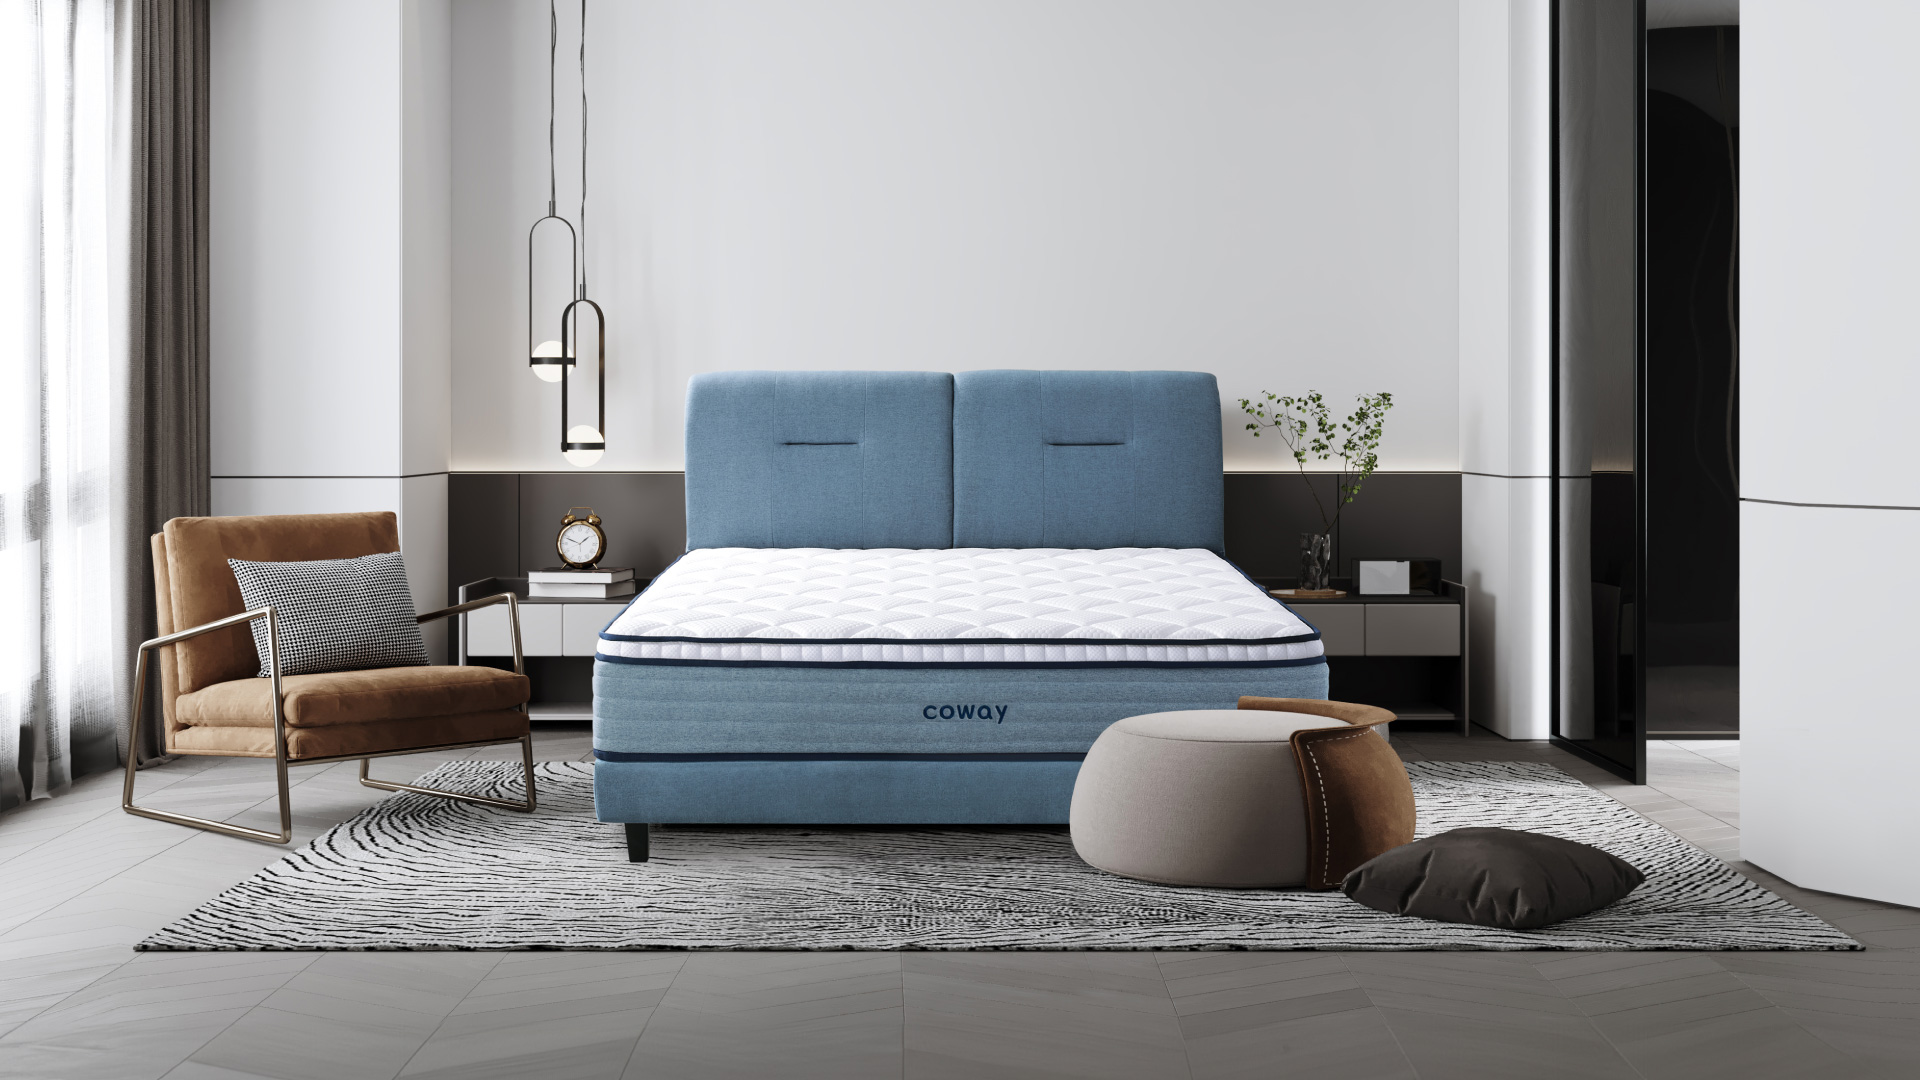 Coway Prime Lite Series Mattress At The Center Of The Room With An Armchair And A Footrest With A Pillow On The Floor - Coway Prime Lite Series